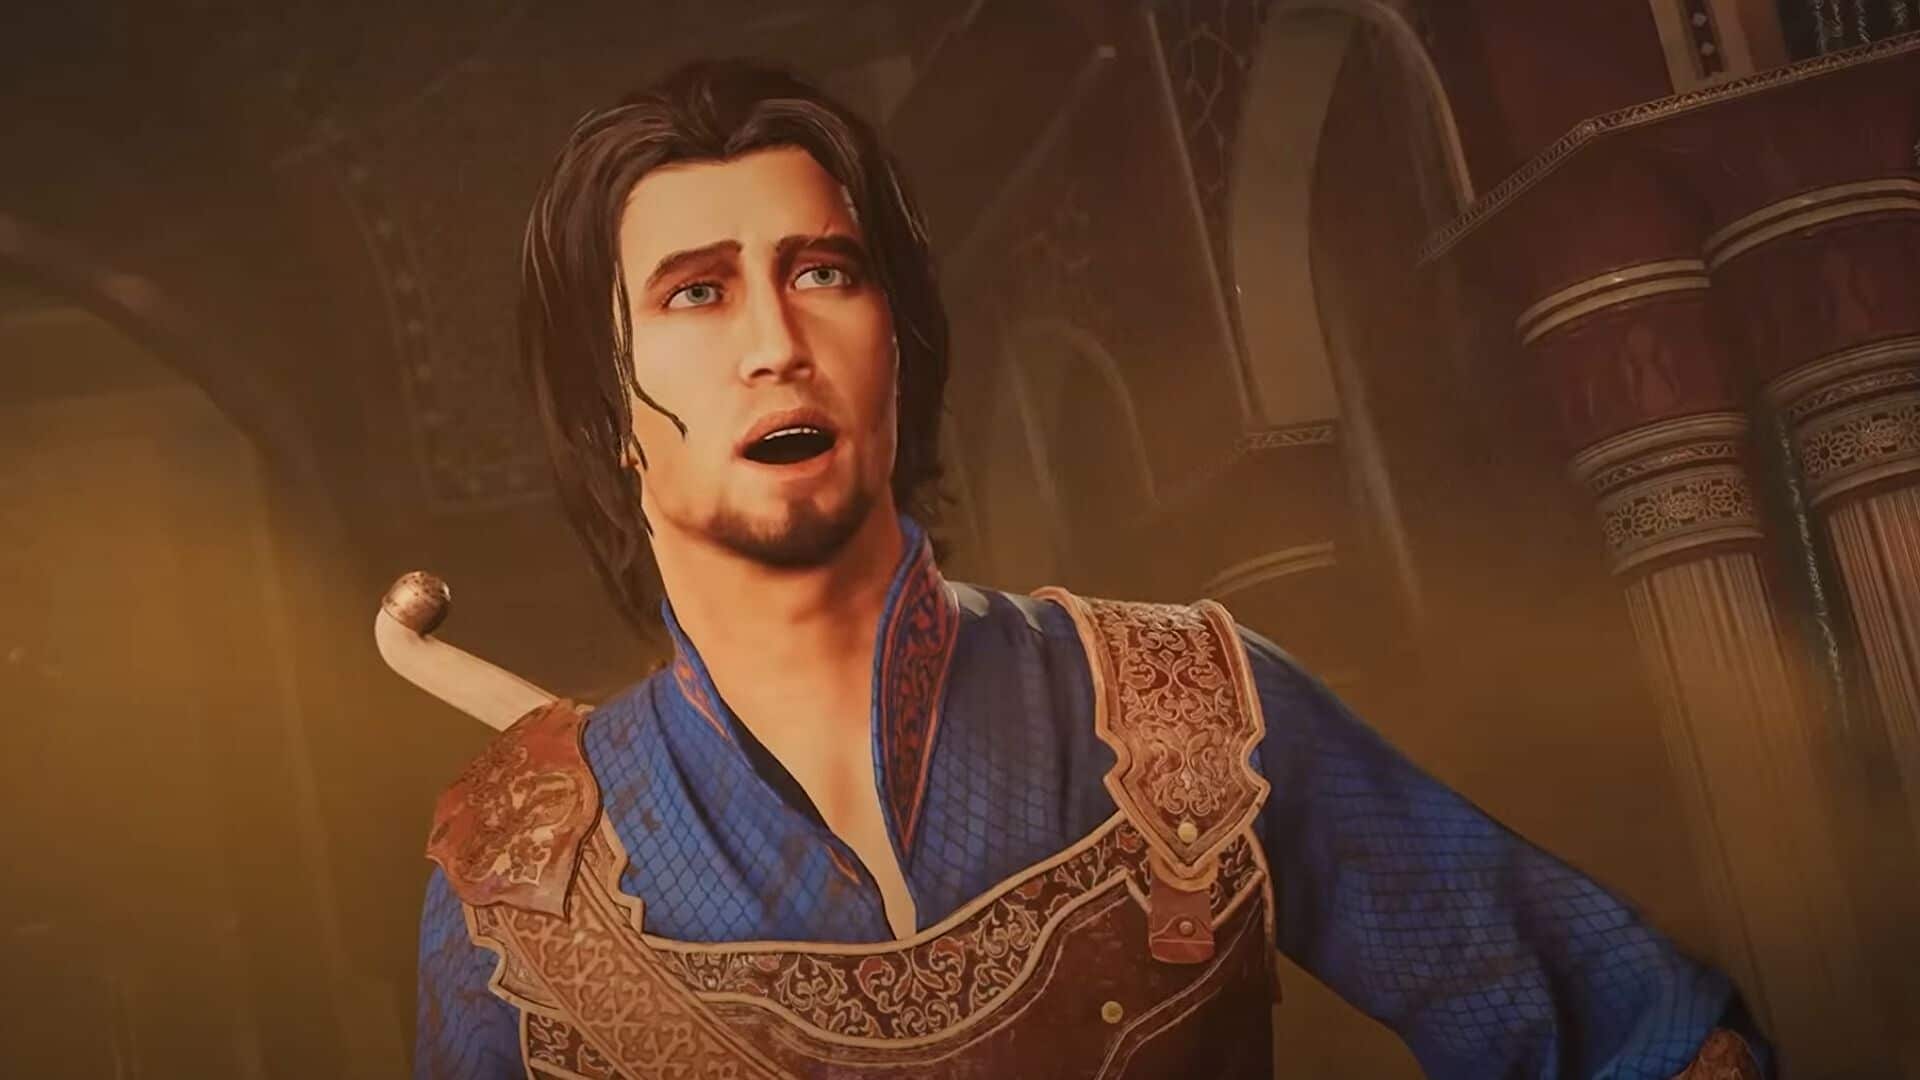 Prince Of Persia: The Sands Of Time Remake development jumps to Ubisoft Montreal